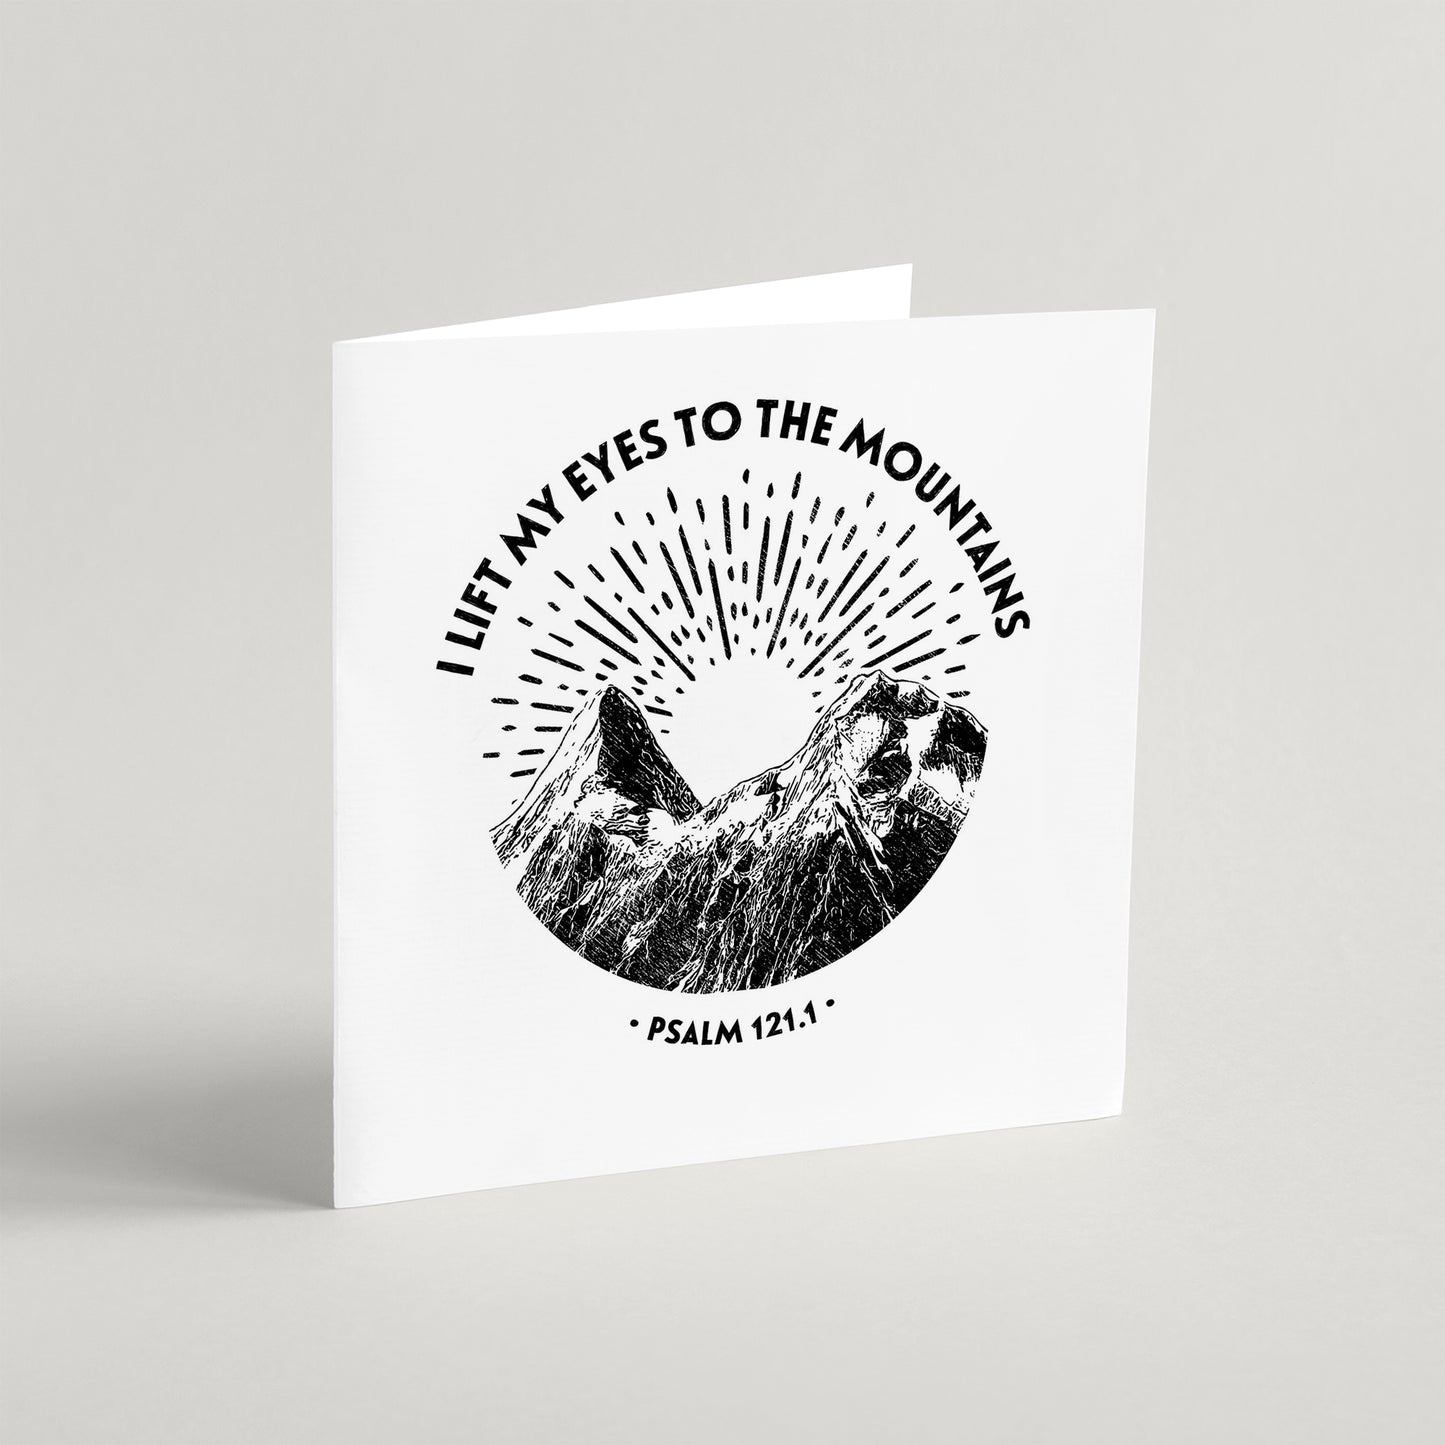 I Lift My Eyes to the Mountains - square greeting card